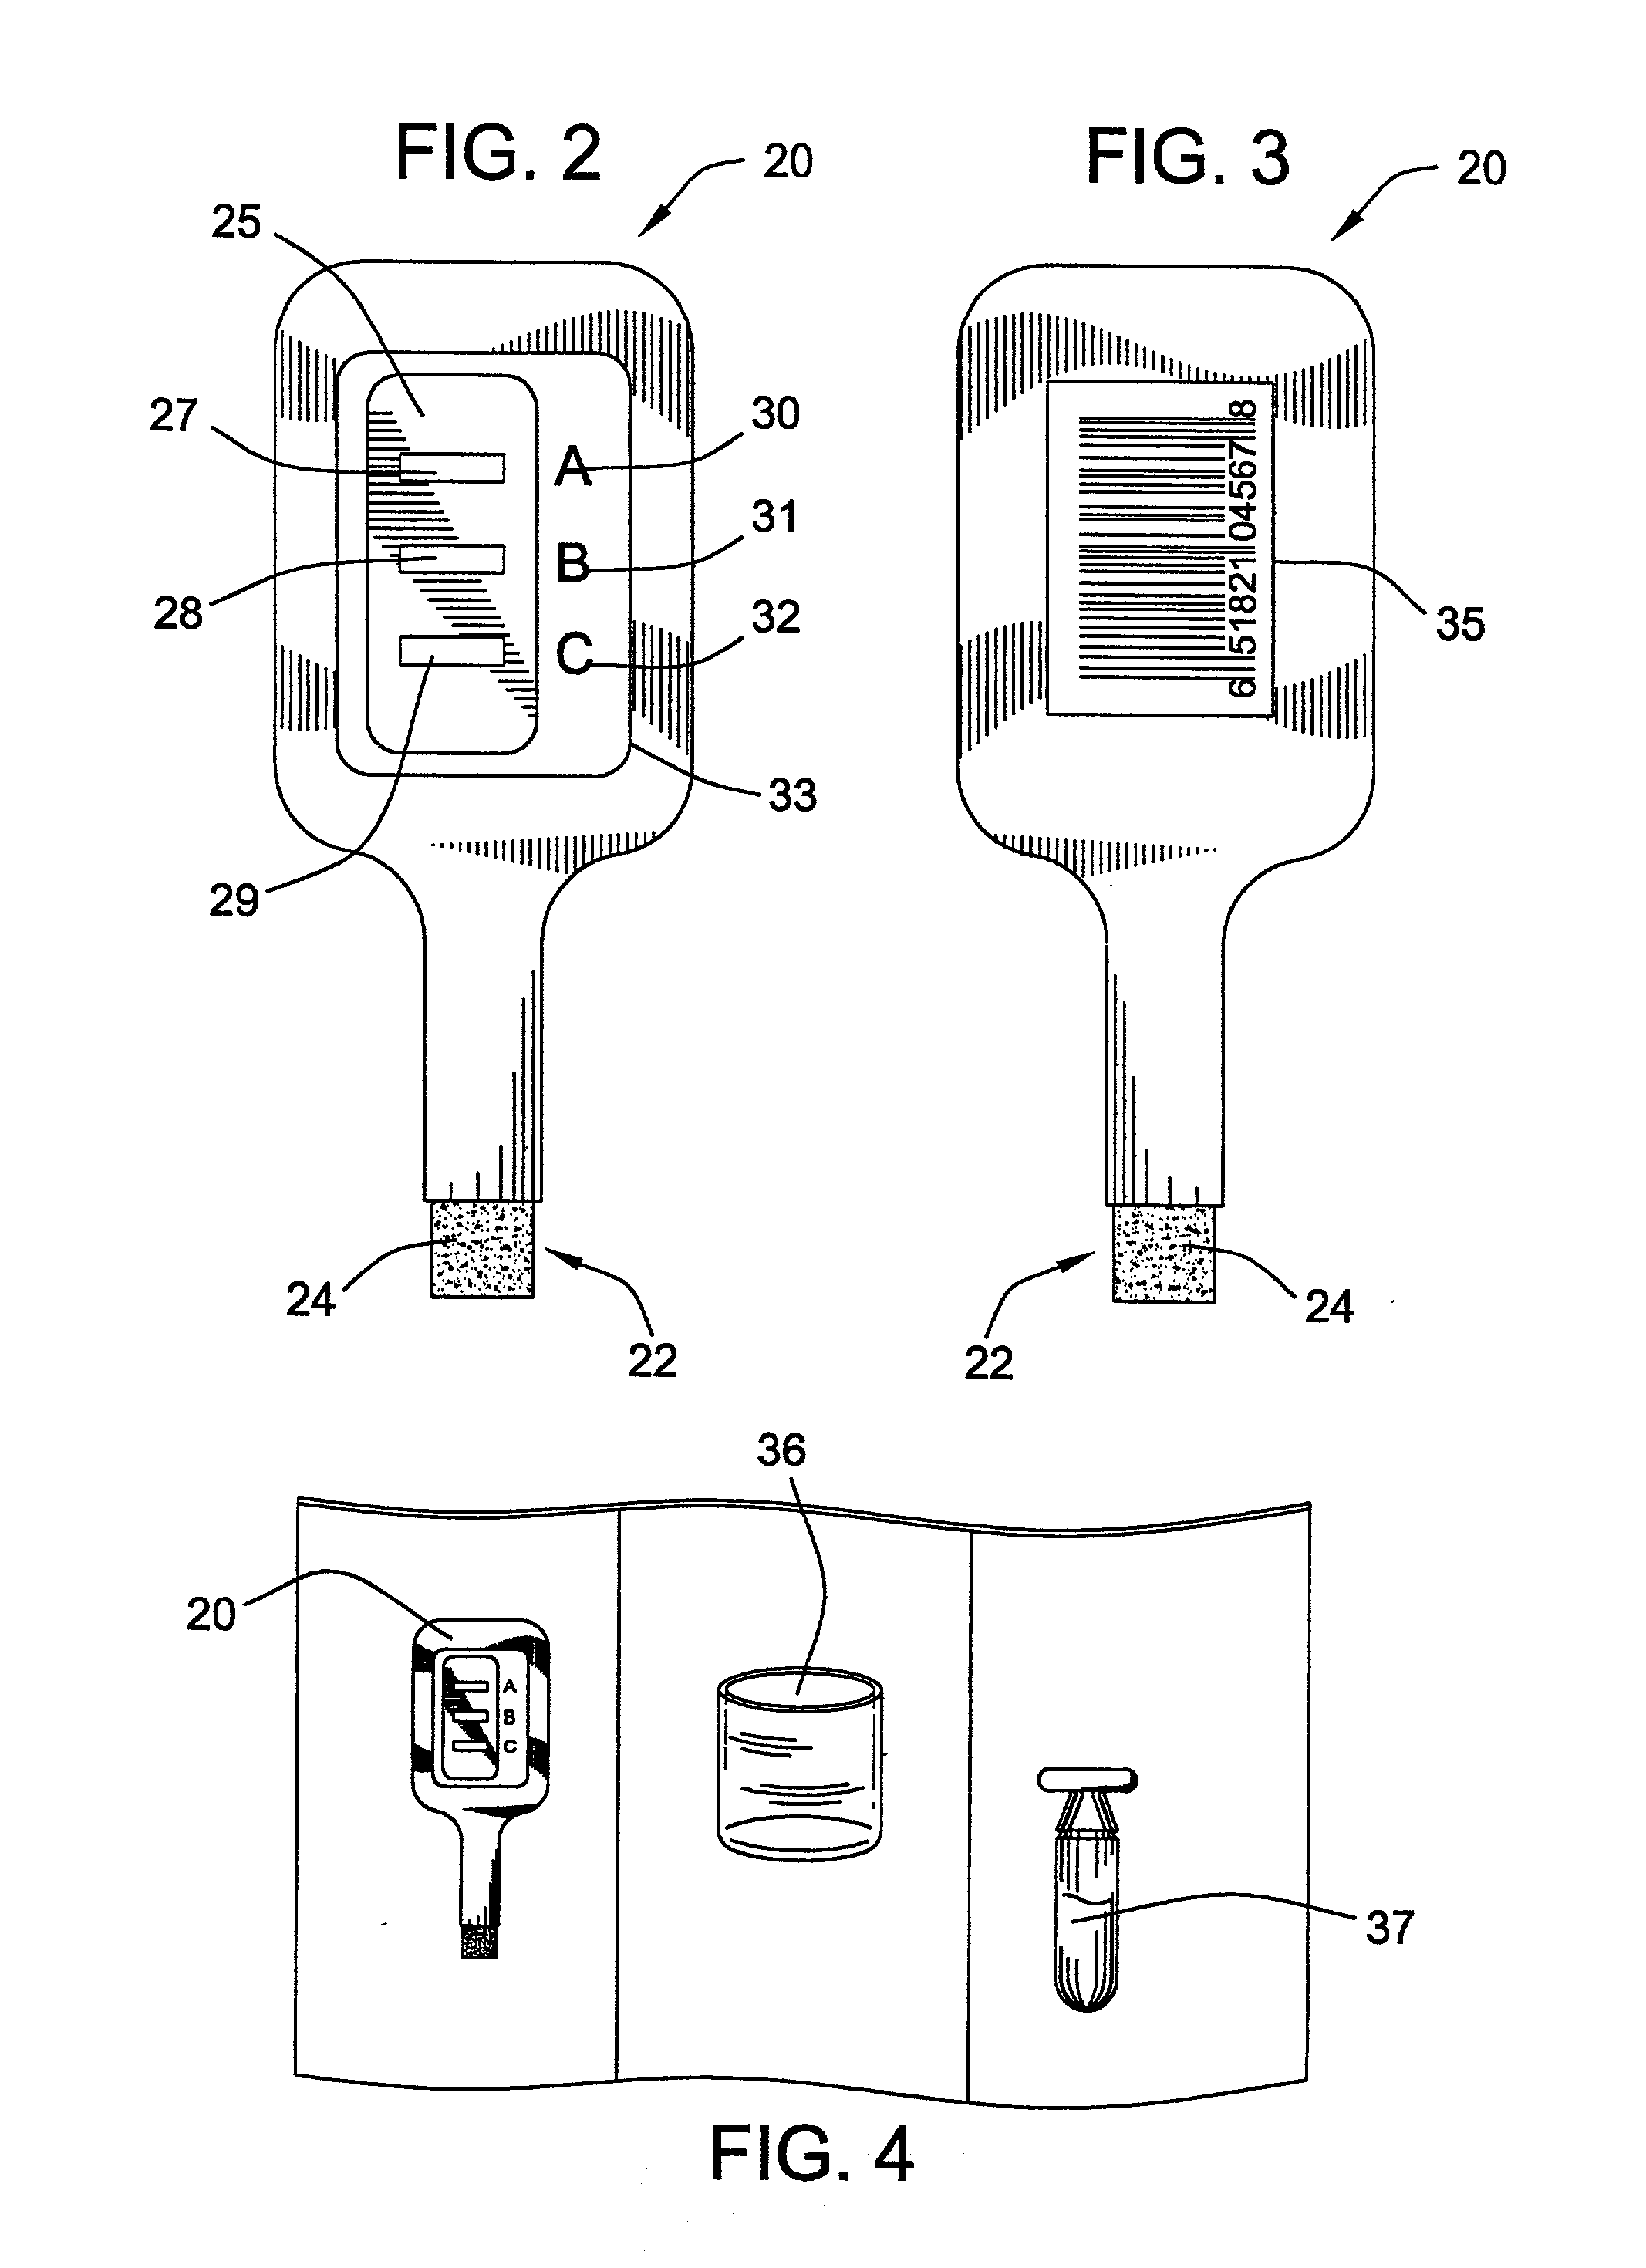 Coded testing apparatus